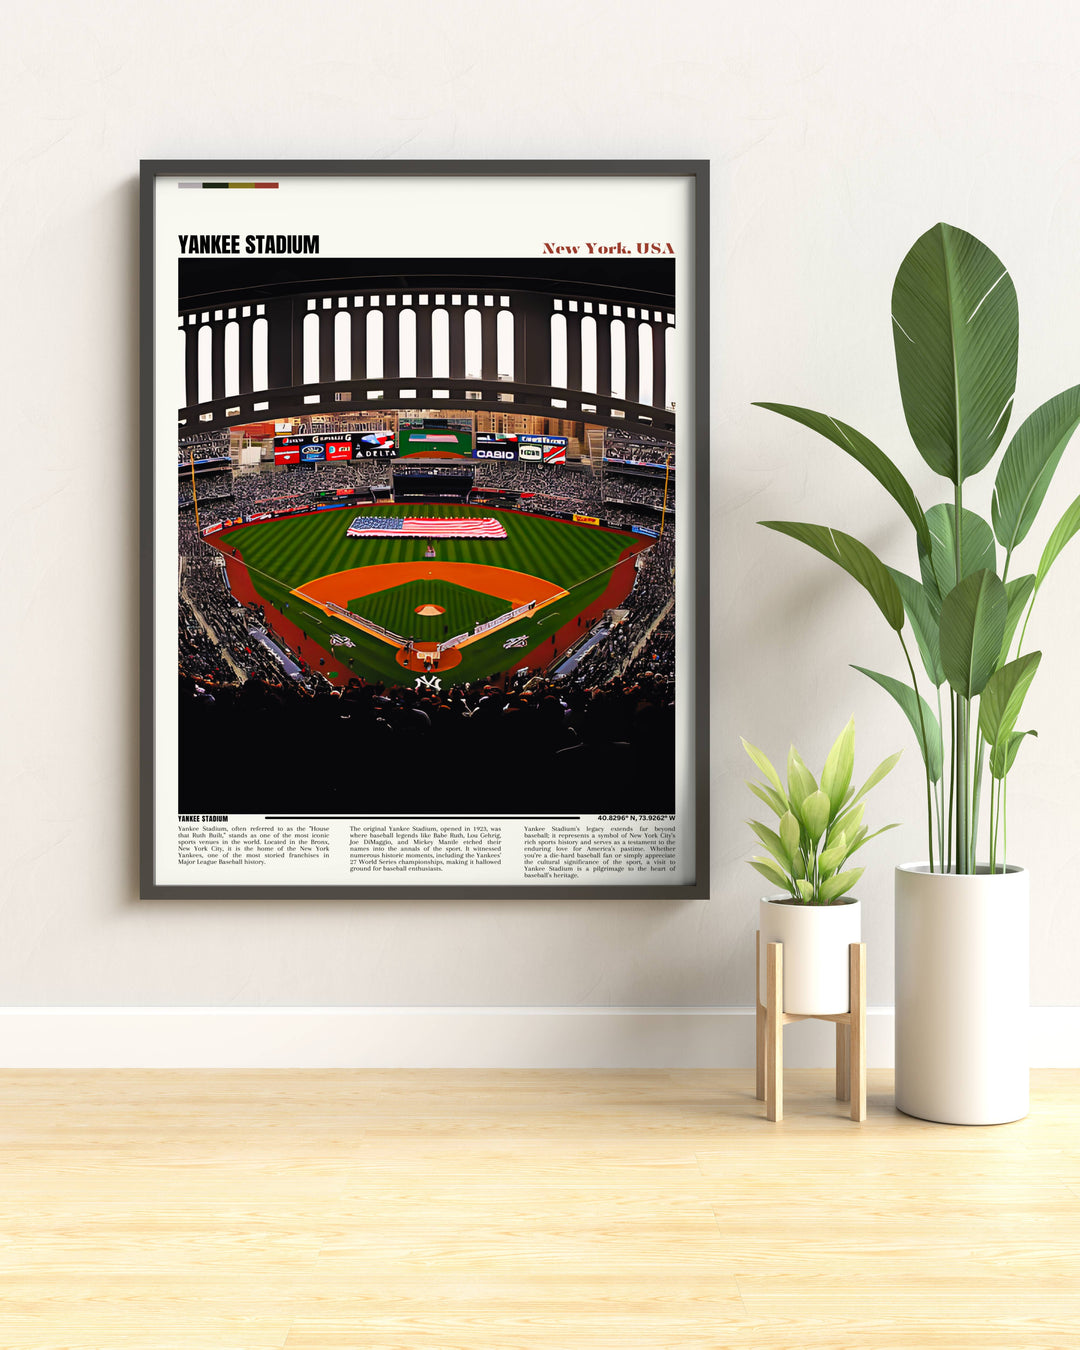 Vintage-style Yankee Stadium travel print, perfect for those who collect historic sports venues in art form.